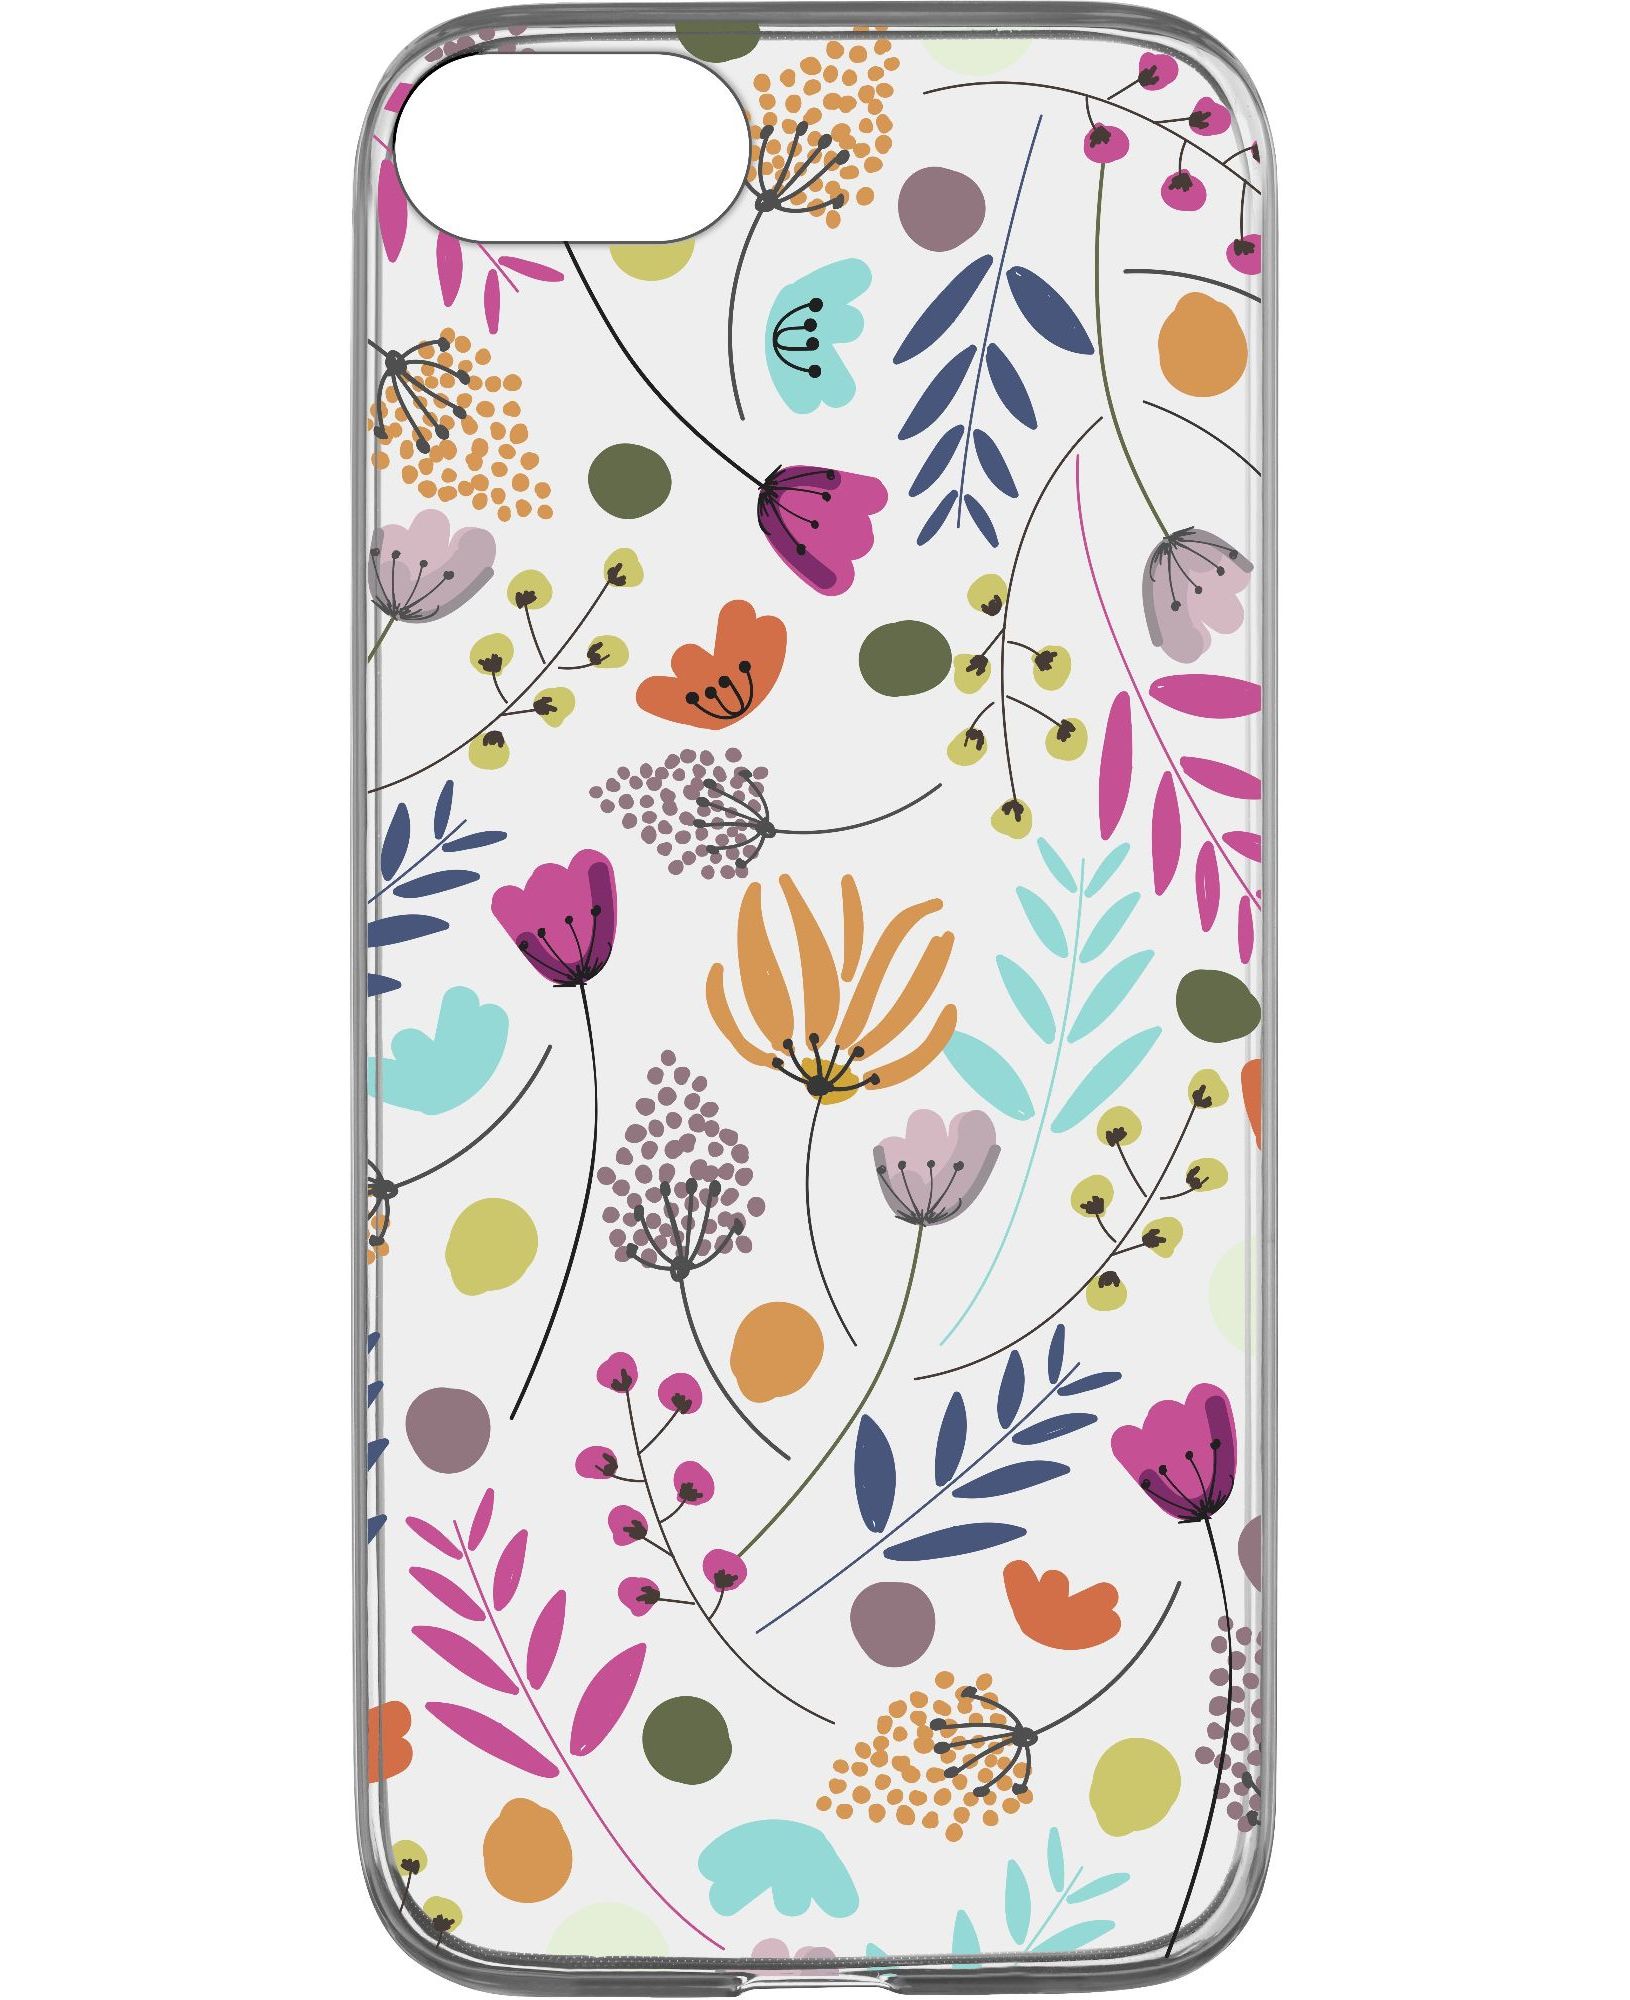 iPhone SE (2020)/8/7/6s/6, case style, flower power